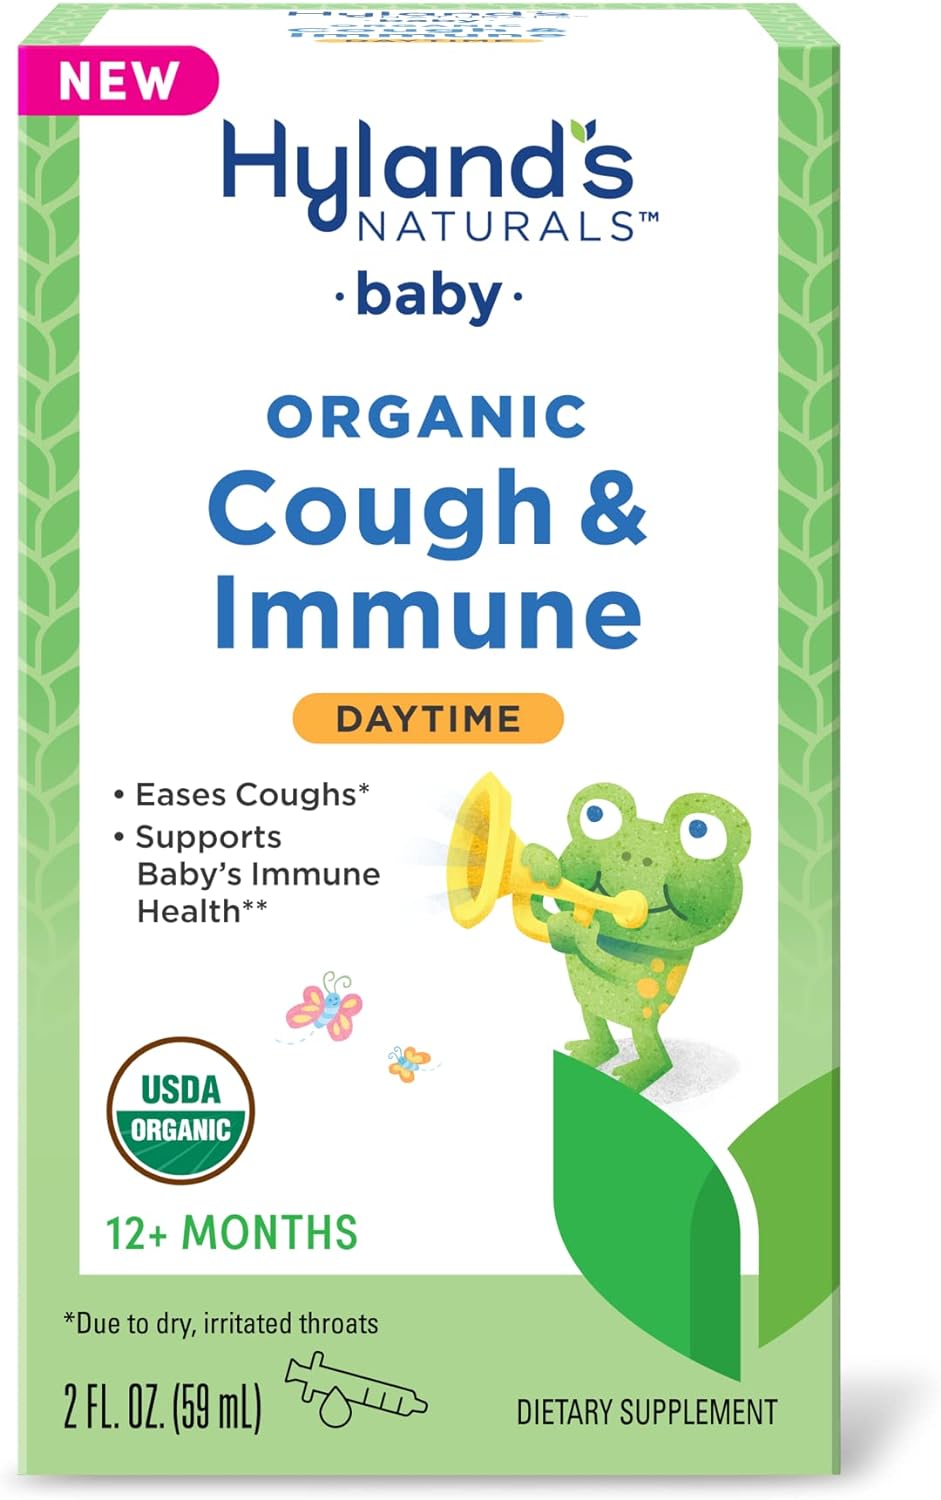 Hyland's Naturals Baby Organic Cough & Immune with Agave, Elderberry & Pomegranate - Soothes Cough and Cold, & Supports Immunity - Daytime - 2 Fl. Oz